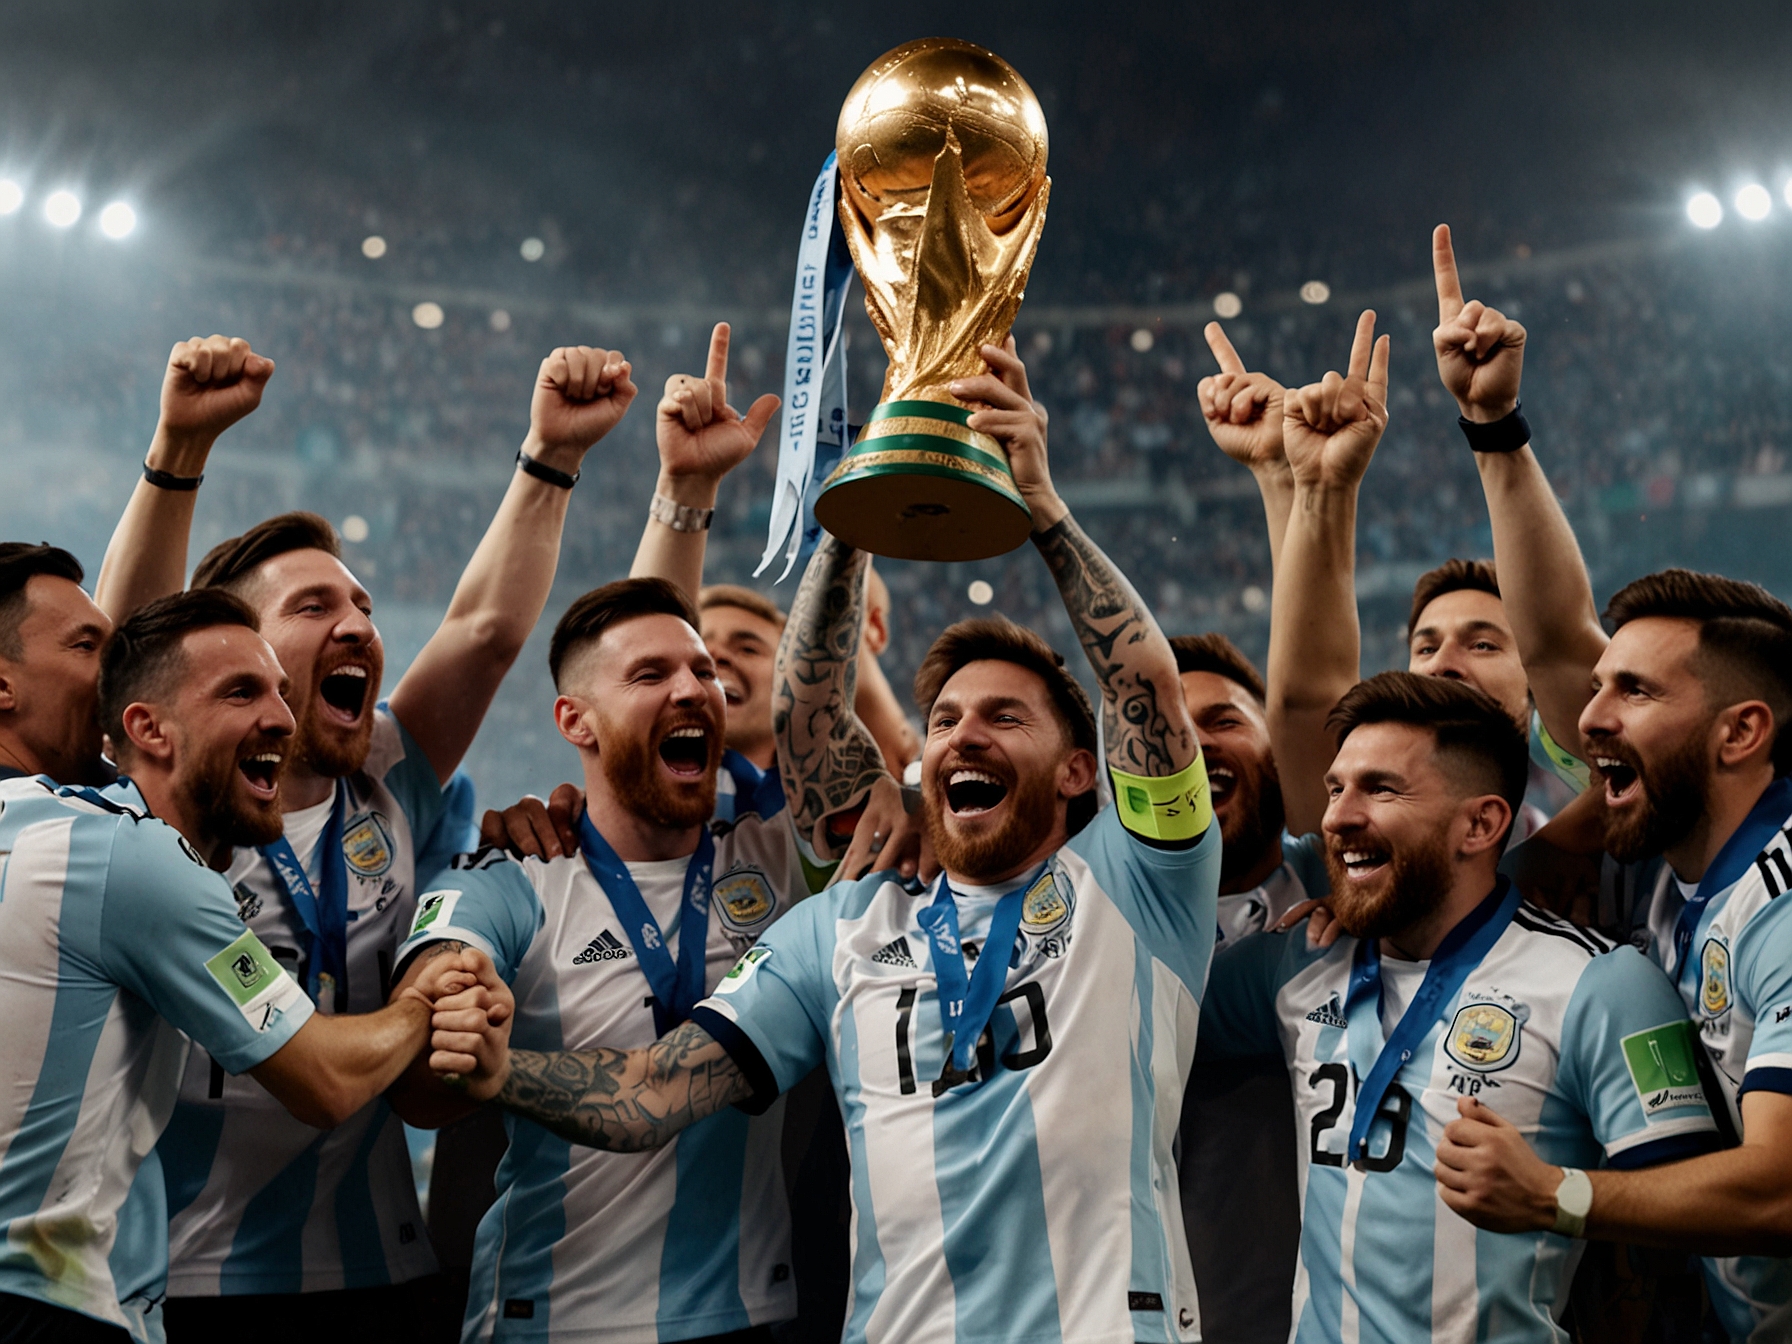 A victorious moment captured during the 2021 Copa America final, showing Argentina's team lifting the trophy, symbolizing their victorious return after 28 years, led by Lionel Messi.